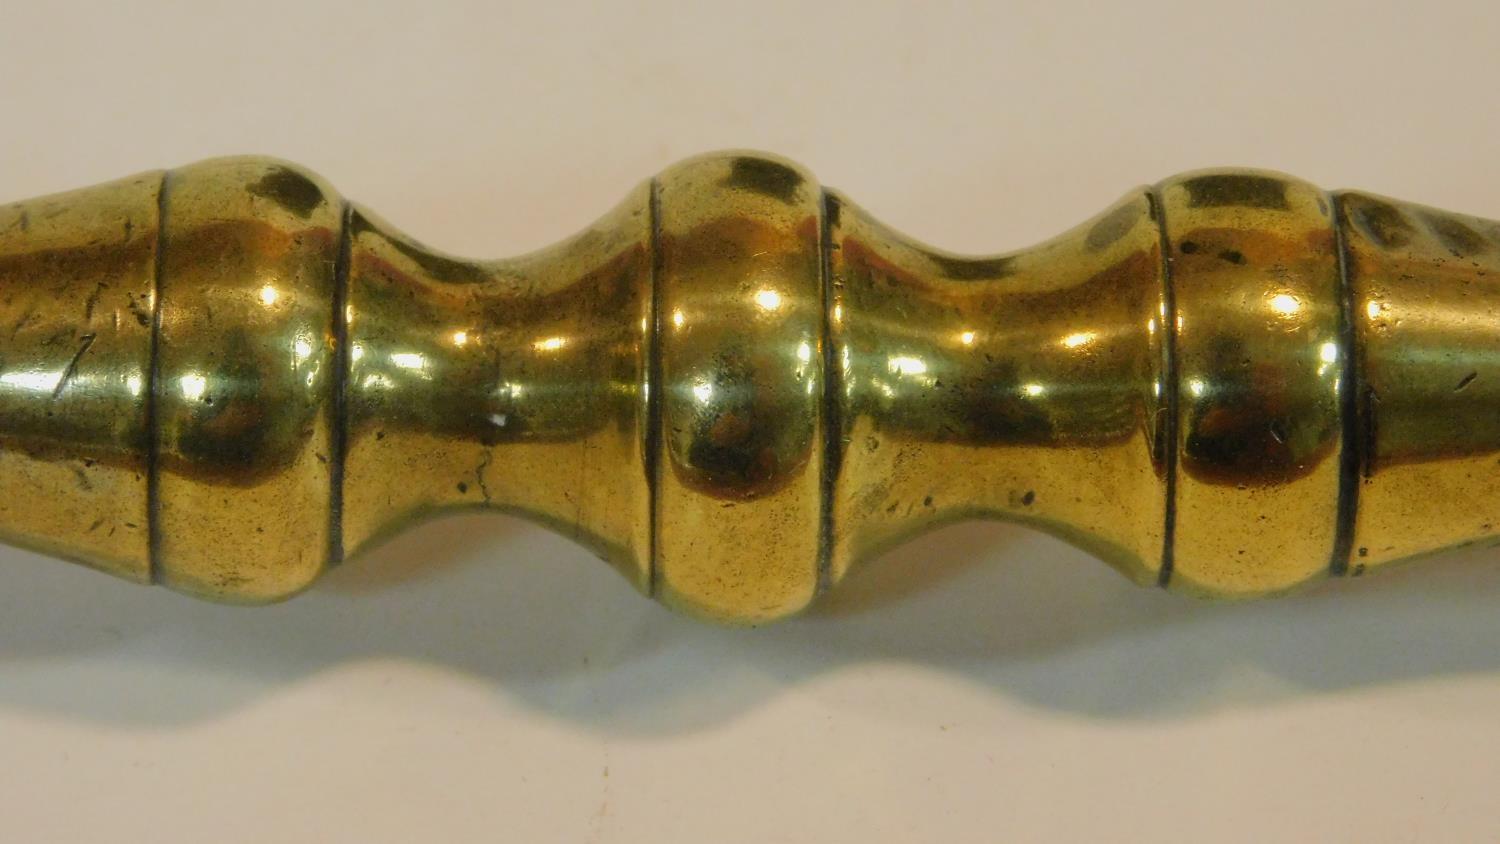 An antique bronze handled mortar and brass pestle. The handle has a textured design and the front of - Image 6 of 8